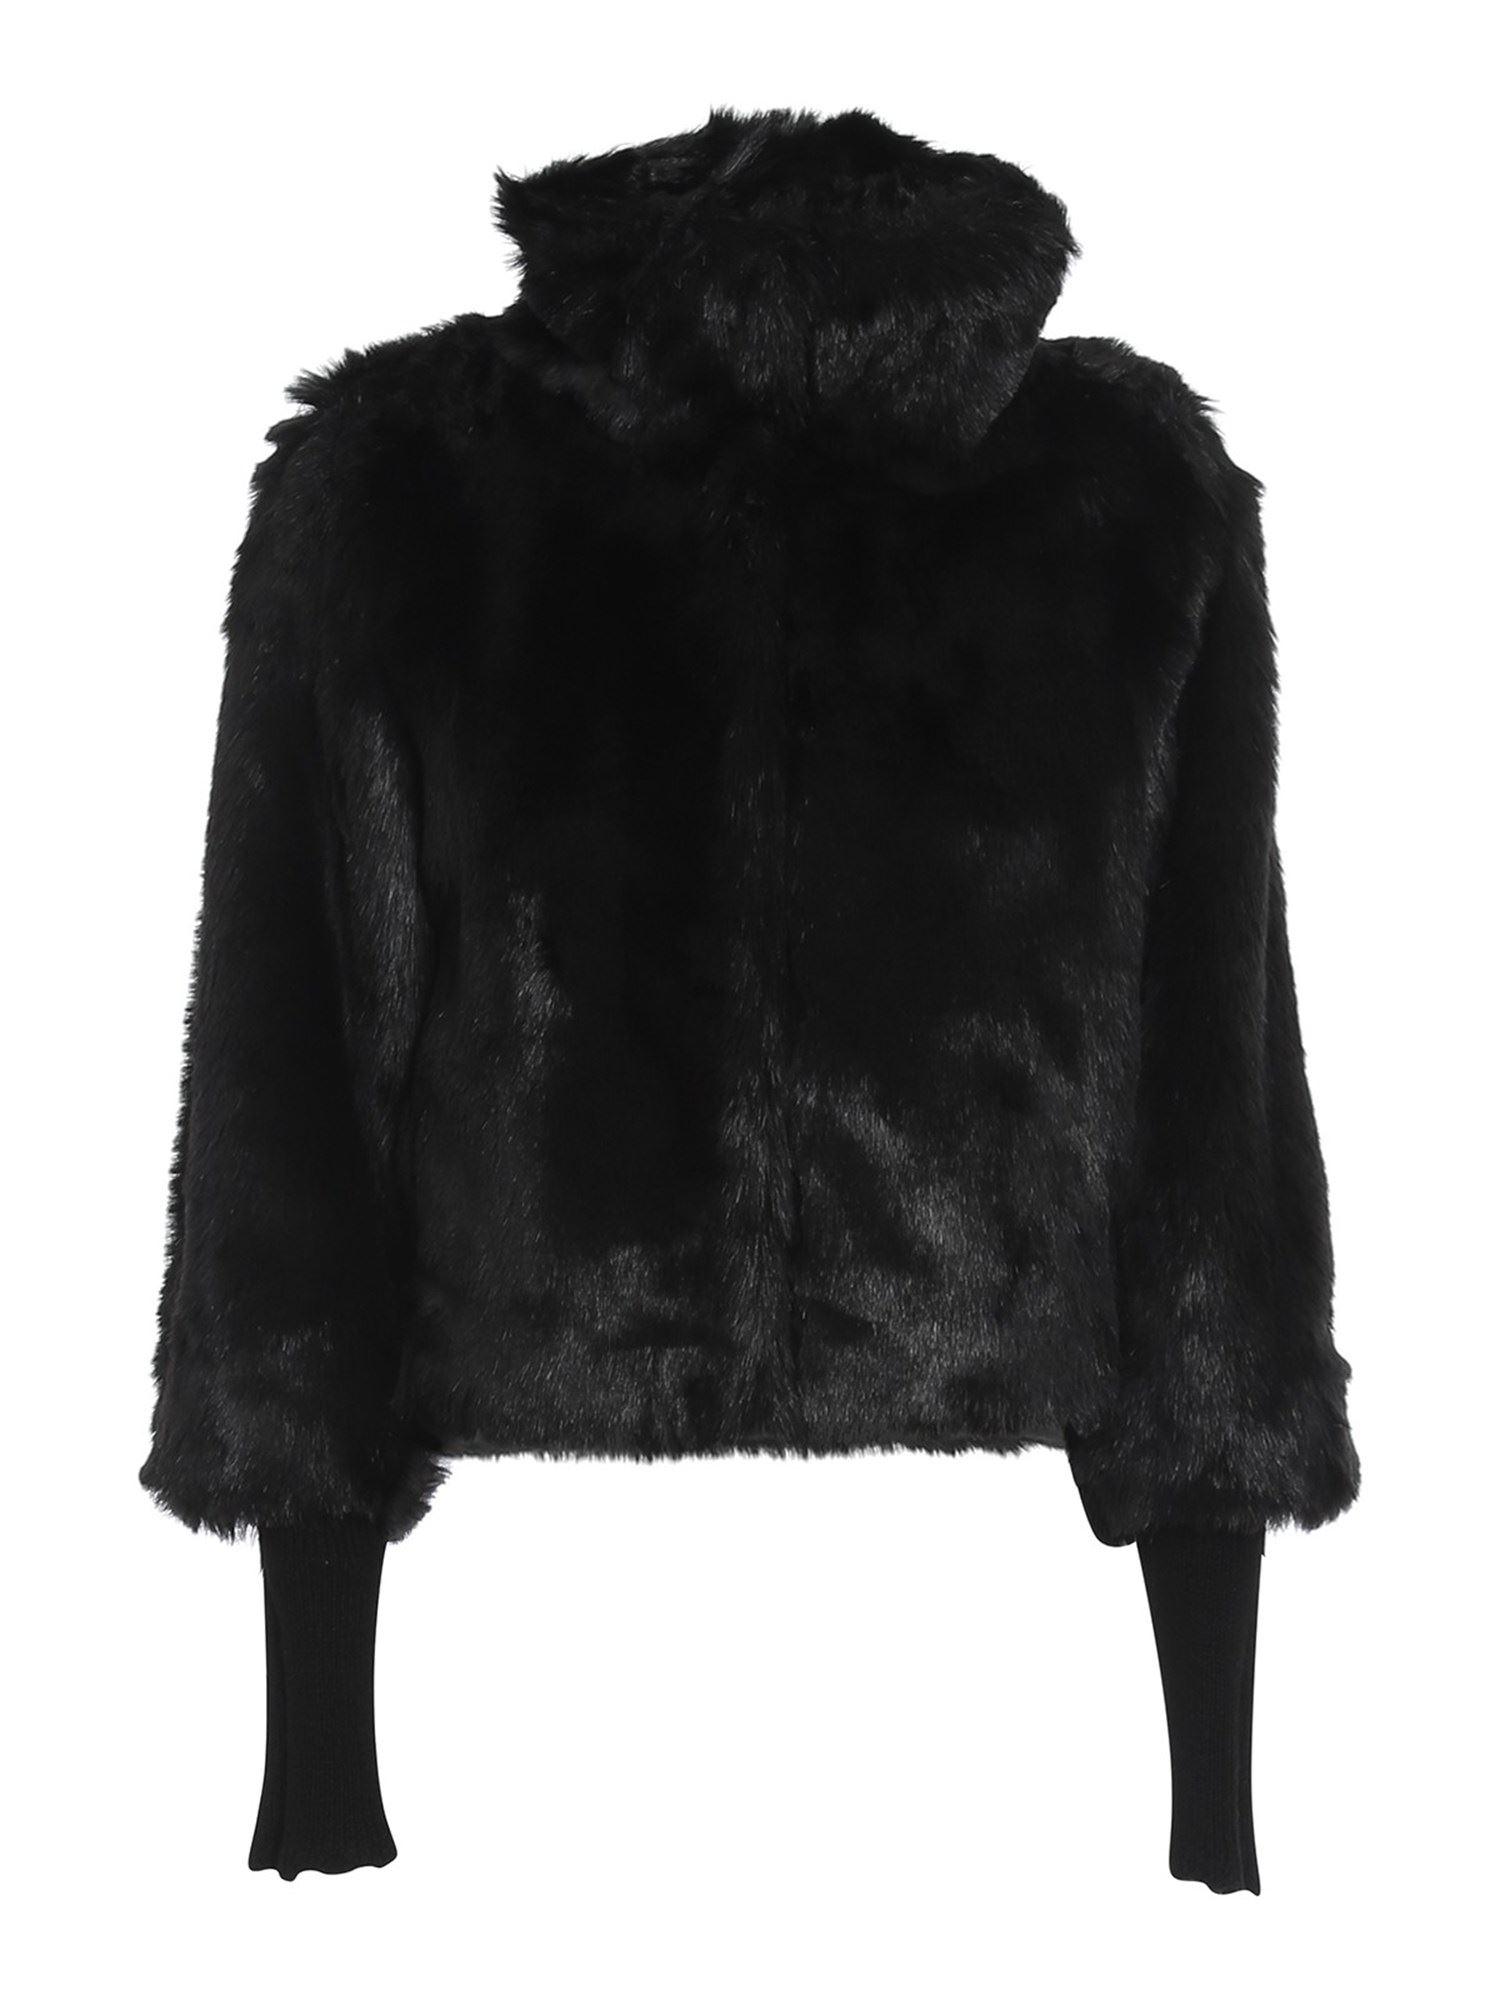 Patrizia Pepe Synthetic Knitted Sleeve Faux Fur Coat in Black - Lyst